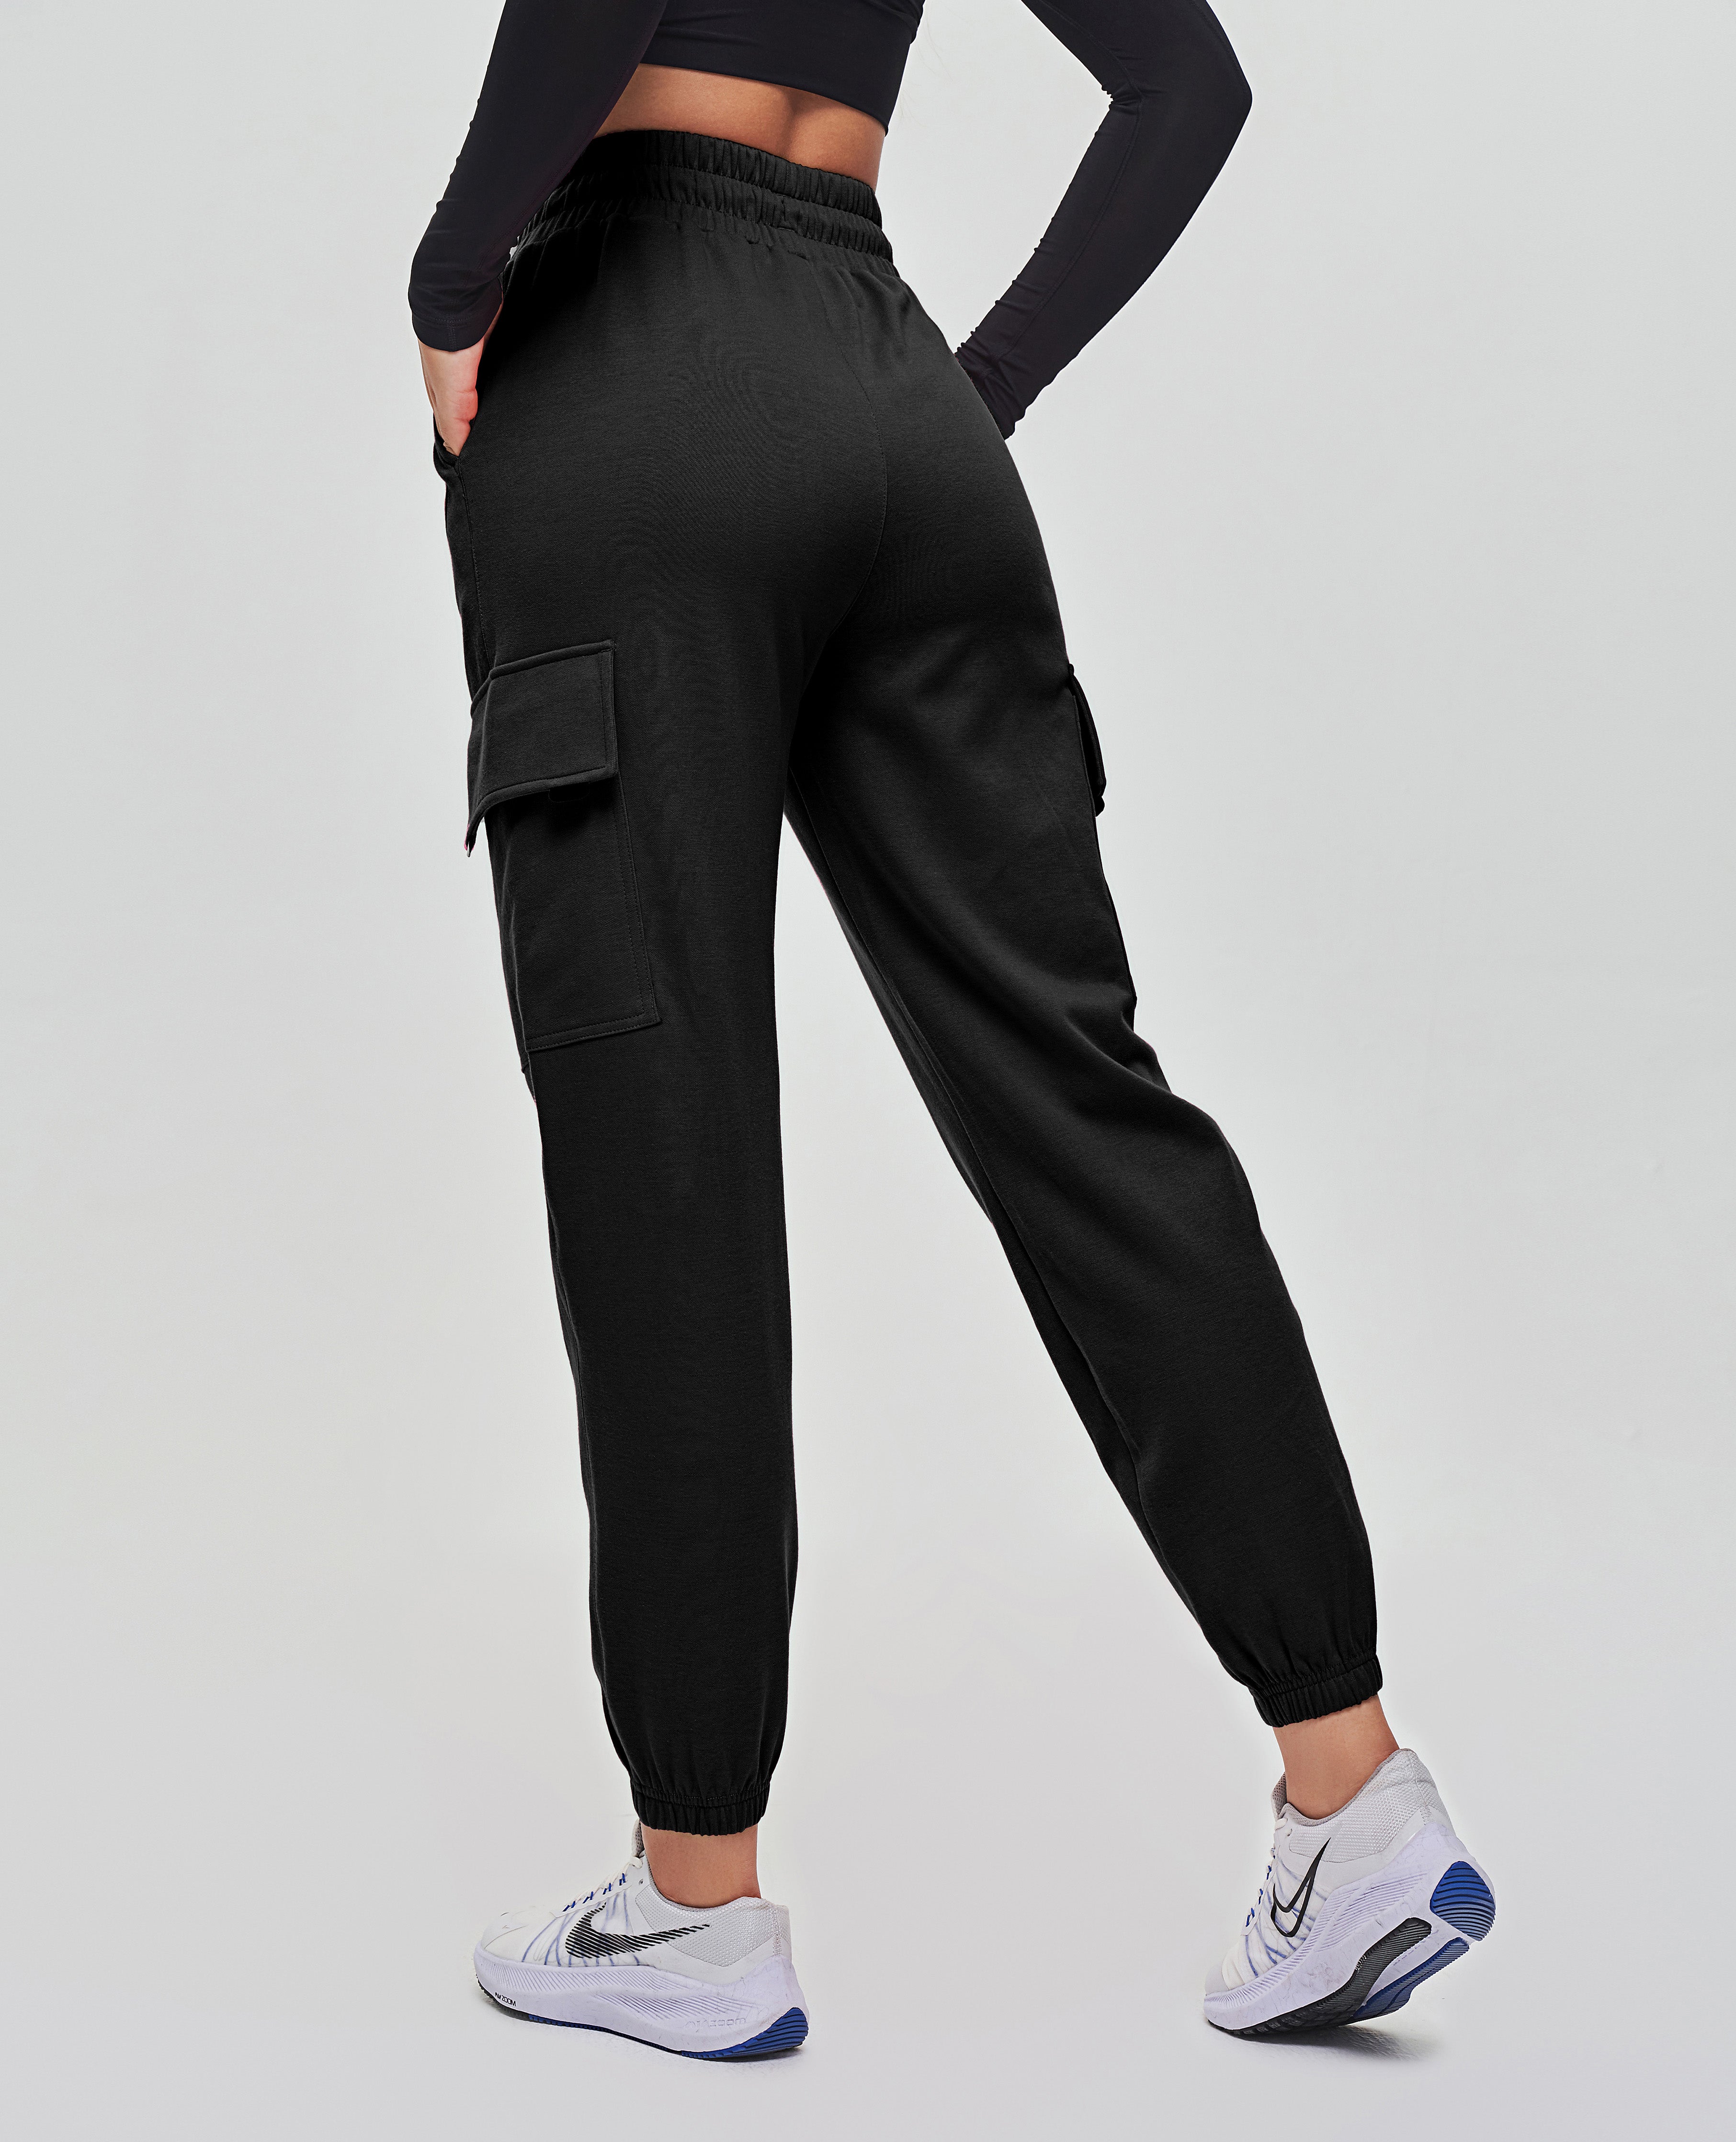 BUIgtTklOP Pants For Women Clearance Womens Checker Printing Sweatpants  Loose Lounge Trousers With Pockets High Waist Pants 